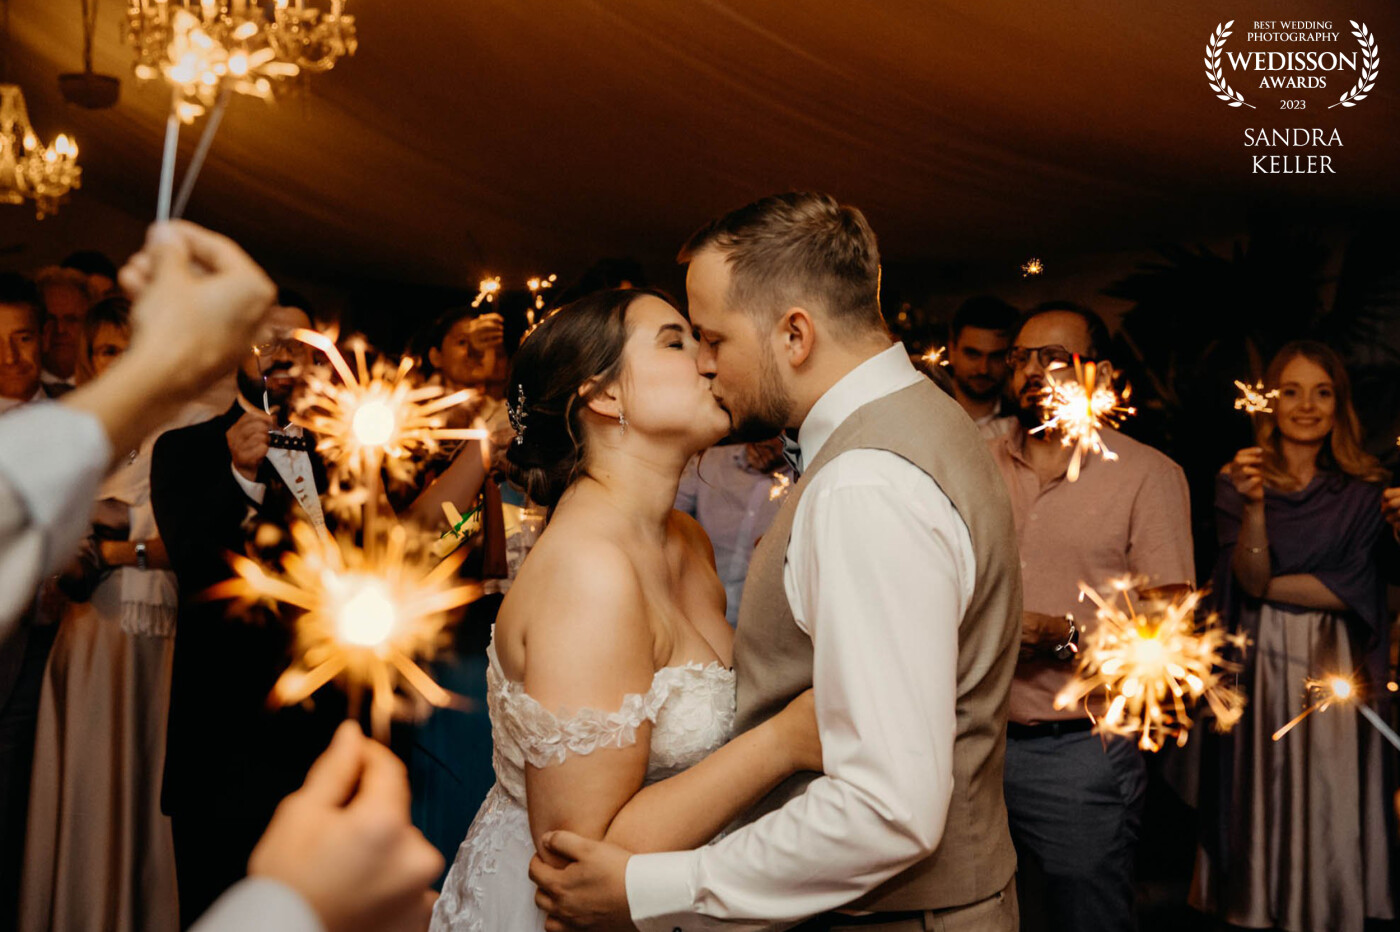 I love first dances with sparklers. That's all you need for a perfect moment: a couple in love and sparklers.